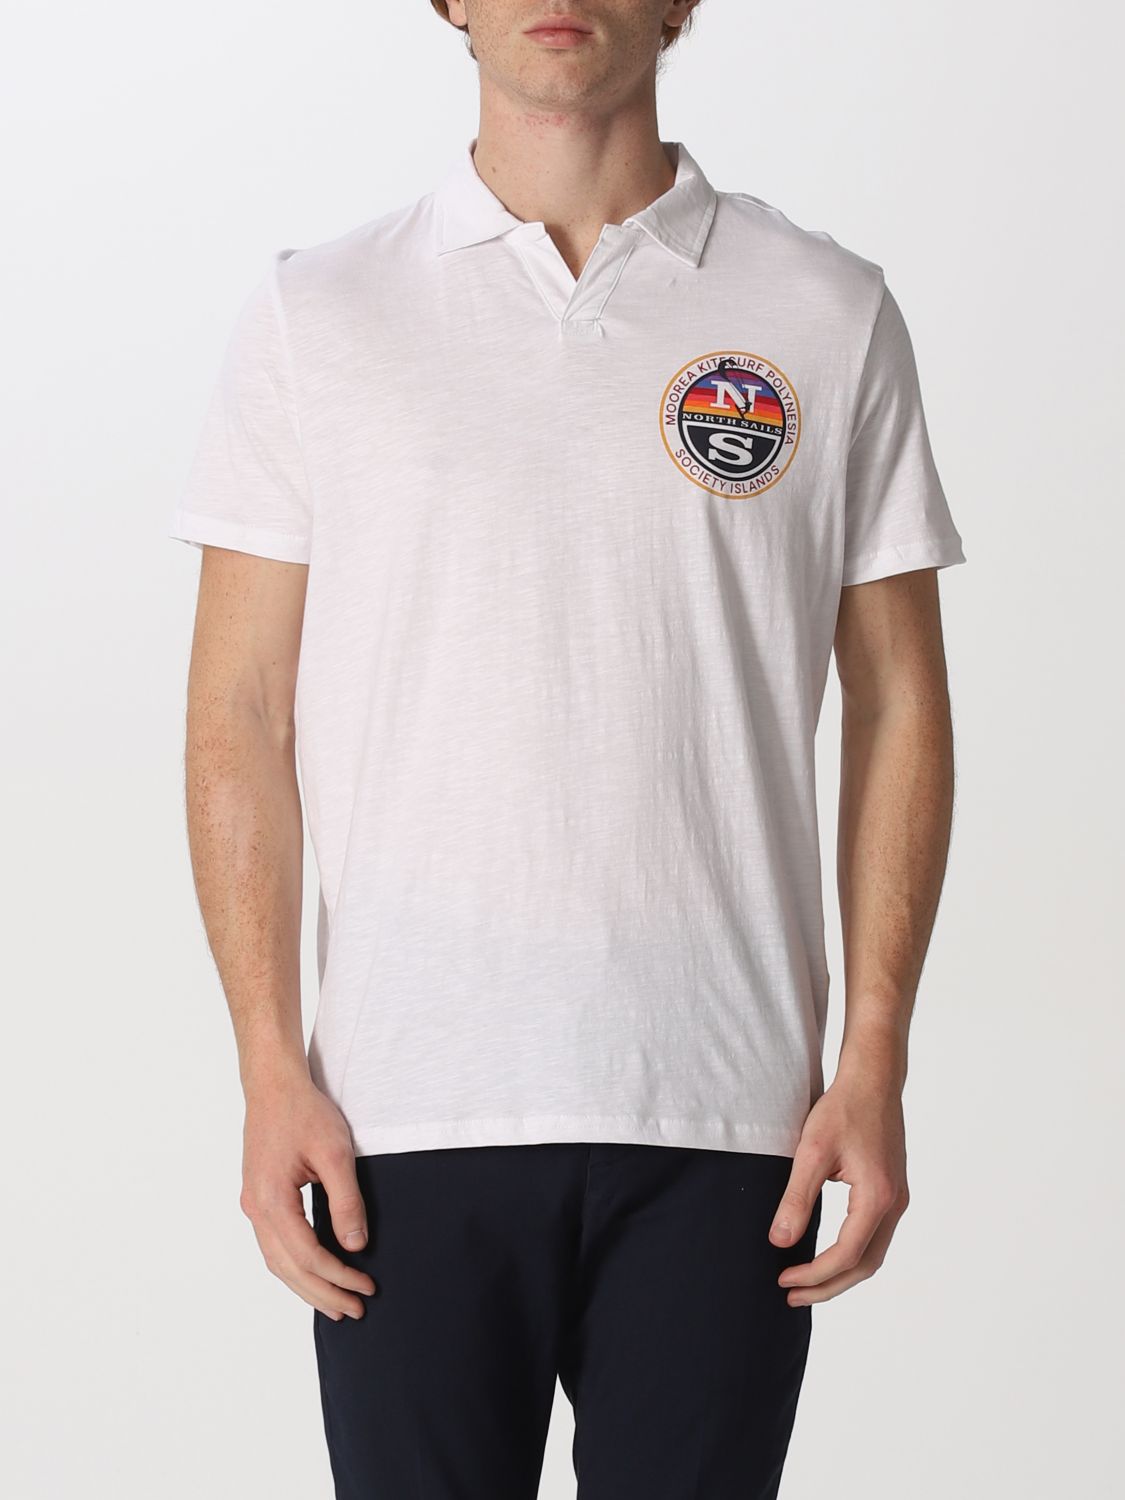 winnaar Zwembad Aanbod North Sails Outlet: polo shirt for man - White | North Sails polo shirt  692355 online on GIGLIO.COM